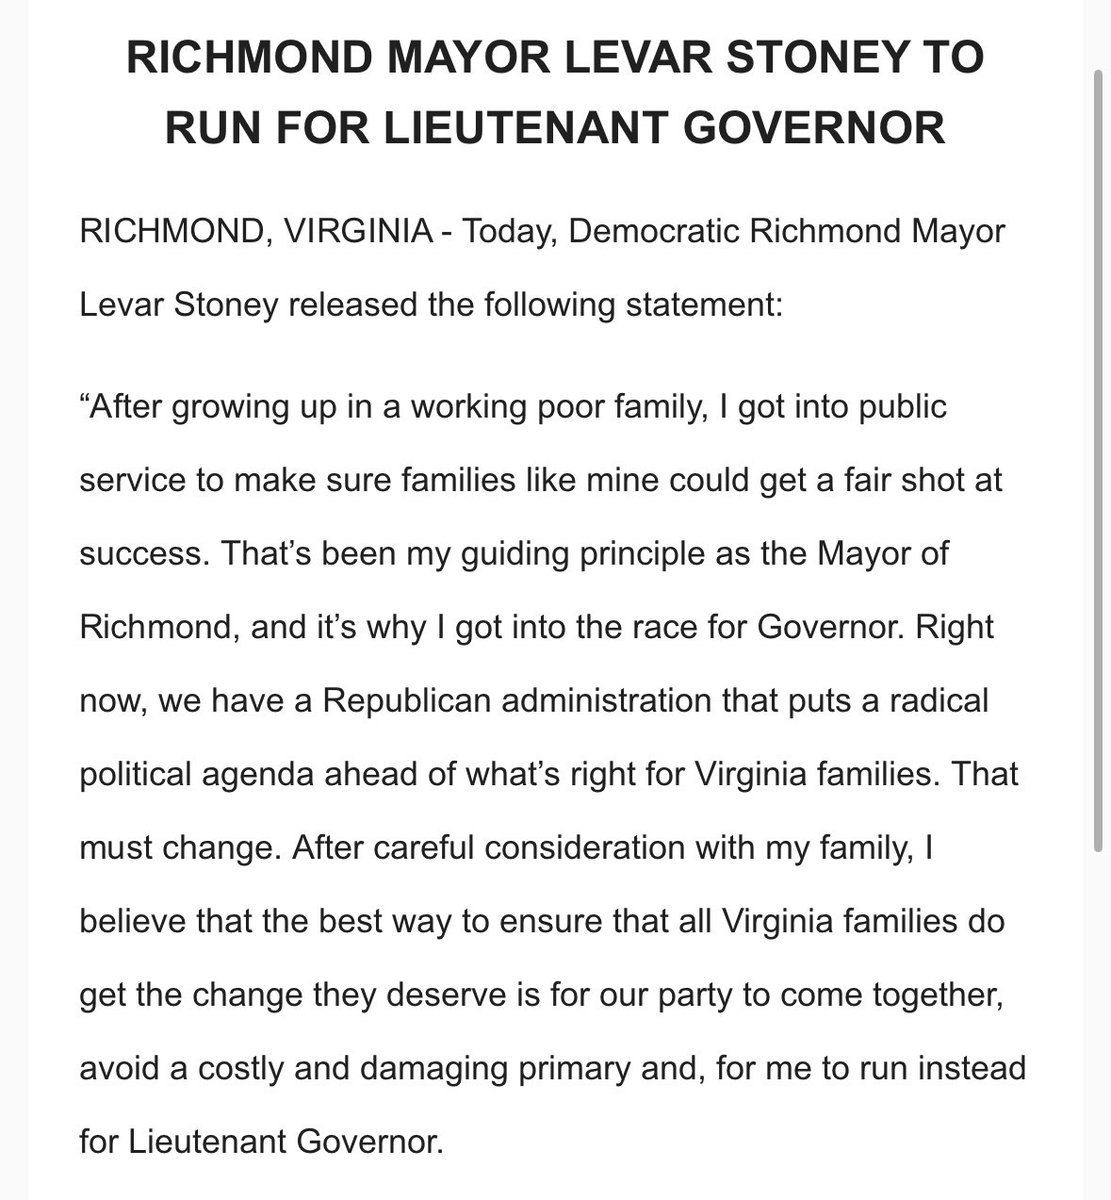 #breaking Richmond Mayor Levar Stoney drops out of Virginia governor’s race, handing the Democratic nomination to Rep. Abigail Spanberger.

Stoney says he’ll run for lieutenant governor instead

#VAGov